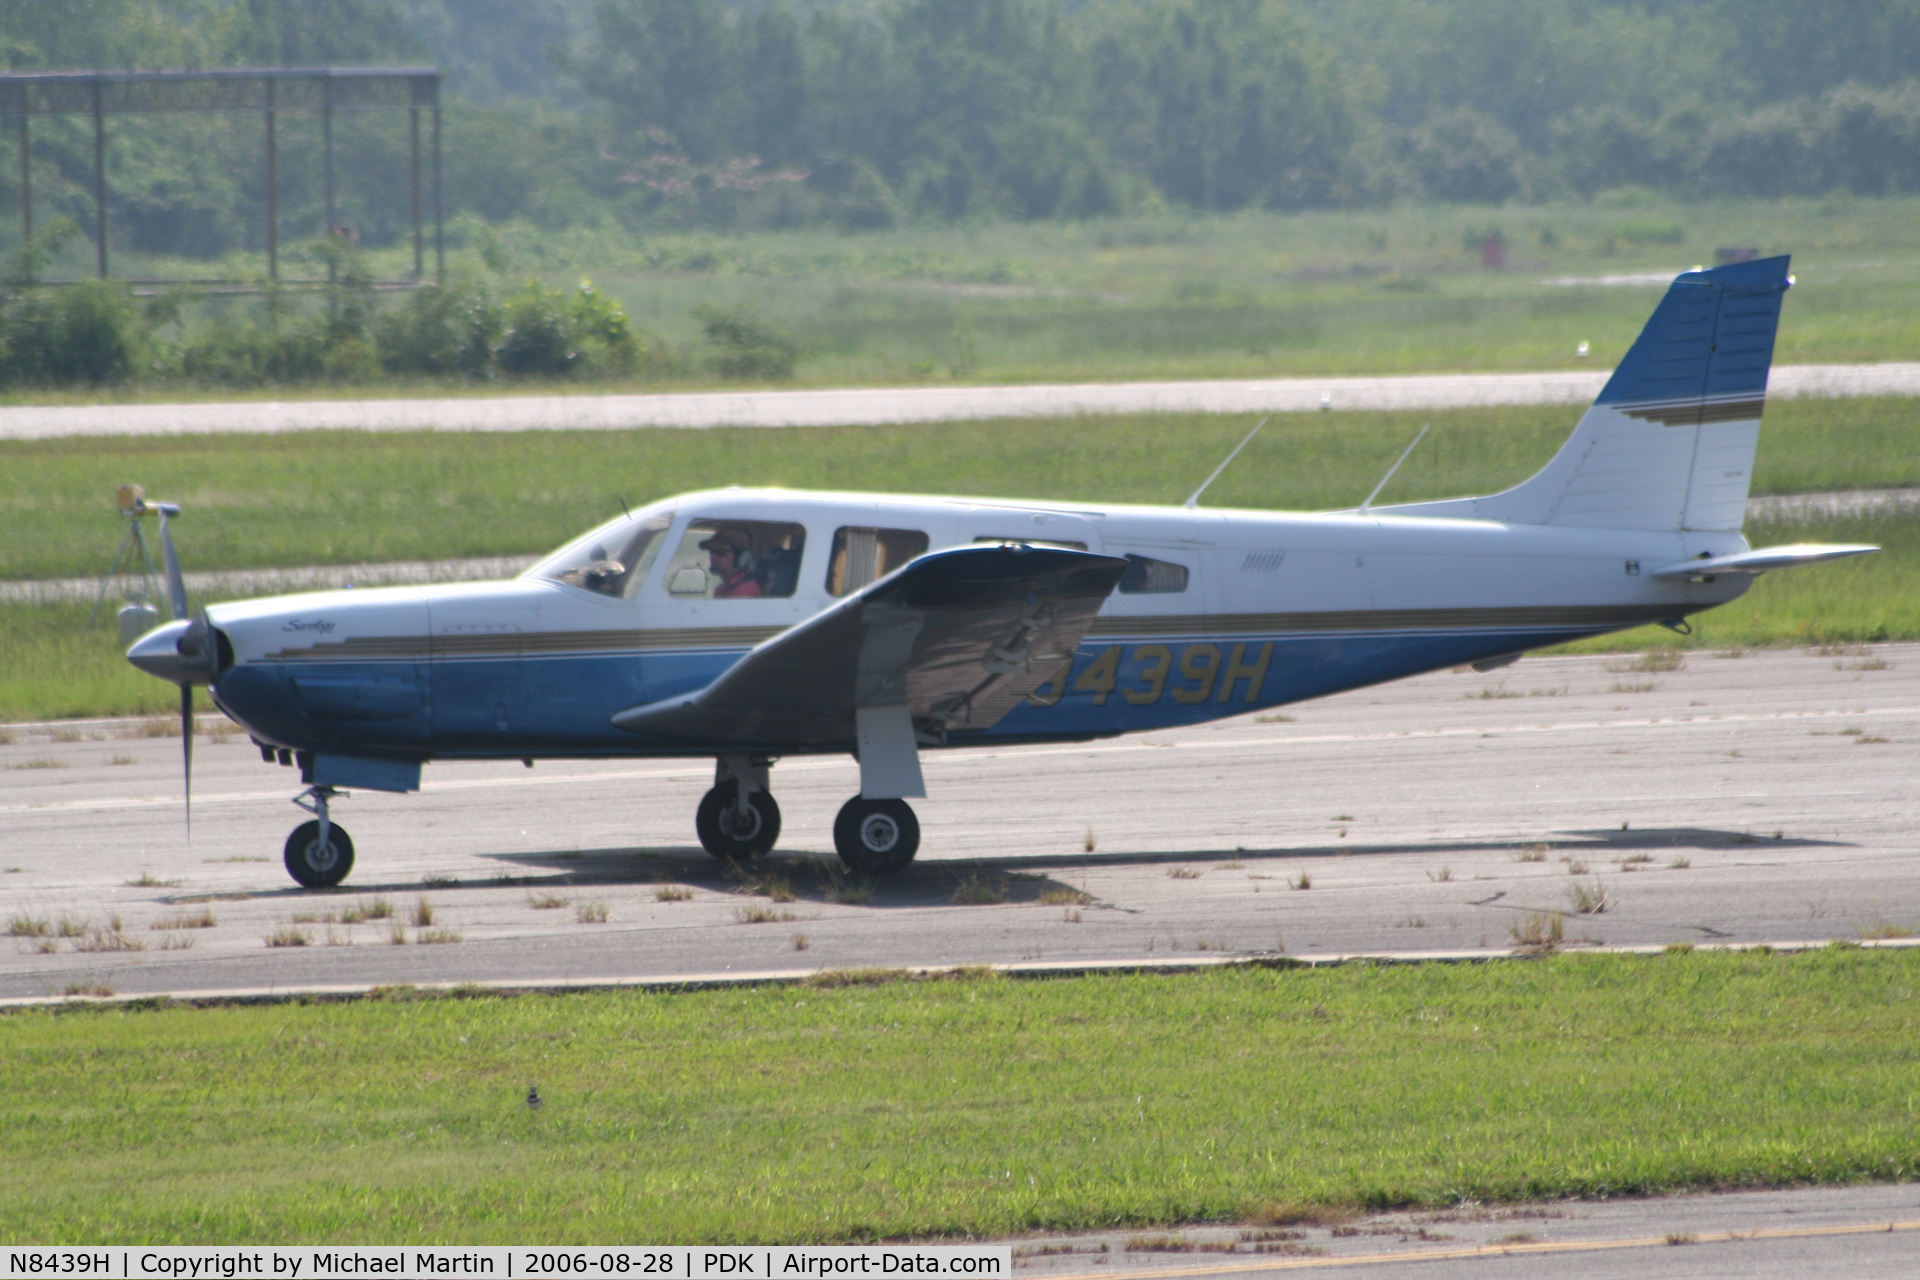 N8439H, 1981 Piper PA-32R-301 Saratoga SP C/N 32R-8113116, Taxing to Epps Air Service